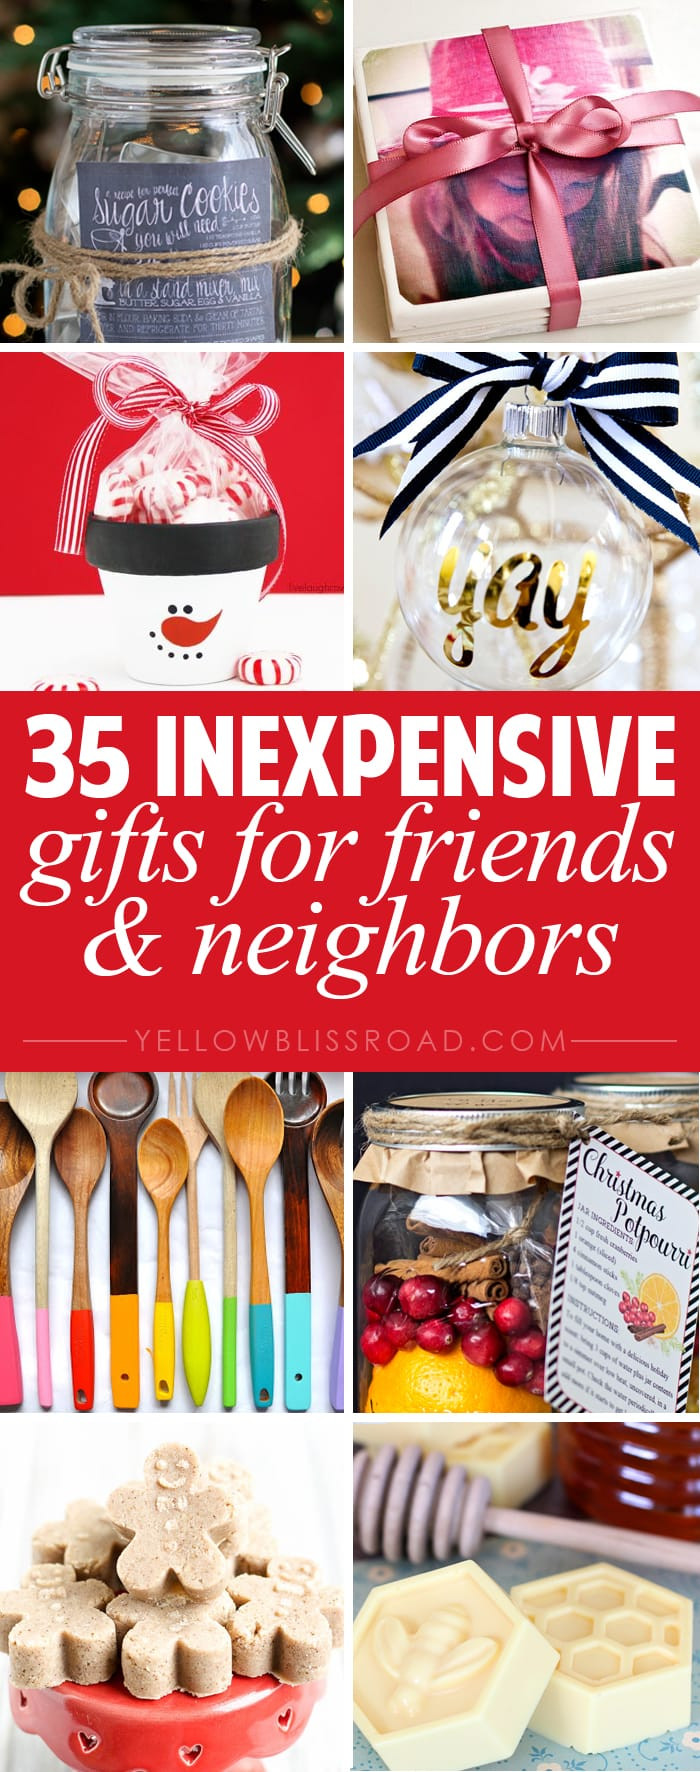 Small Christmas Gift Ideas For Friends
 35 Gift Ideas for Neighbors and Friends Yellow Bliss Road